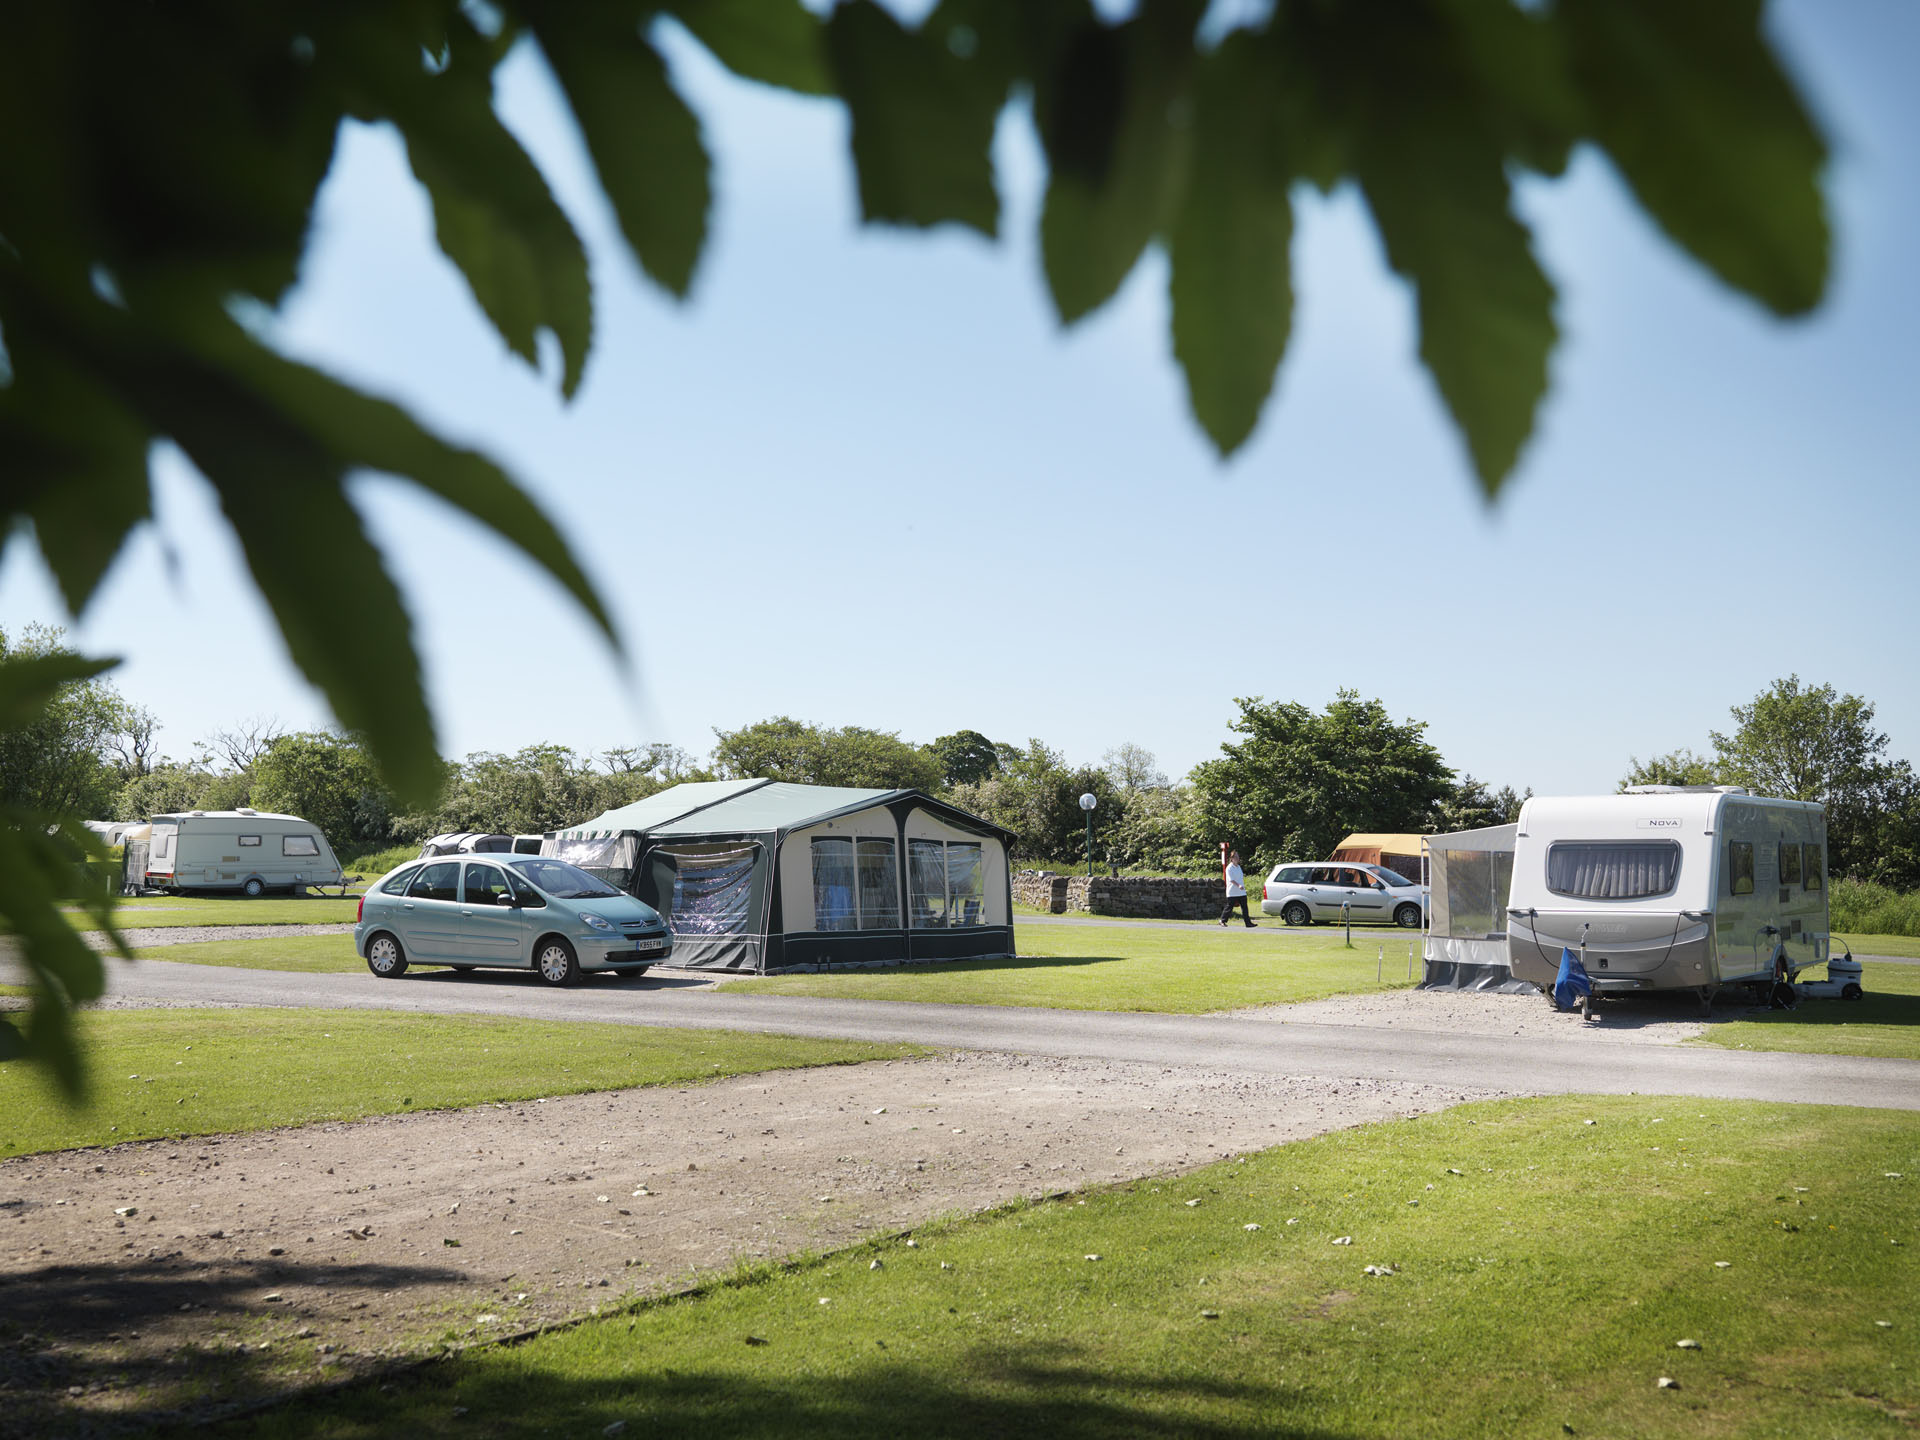 Leek - Camping and Caravanning Club Site - The Camping and Caravanning Club